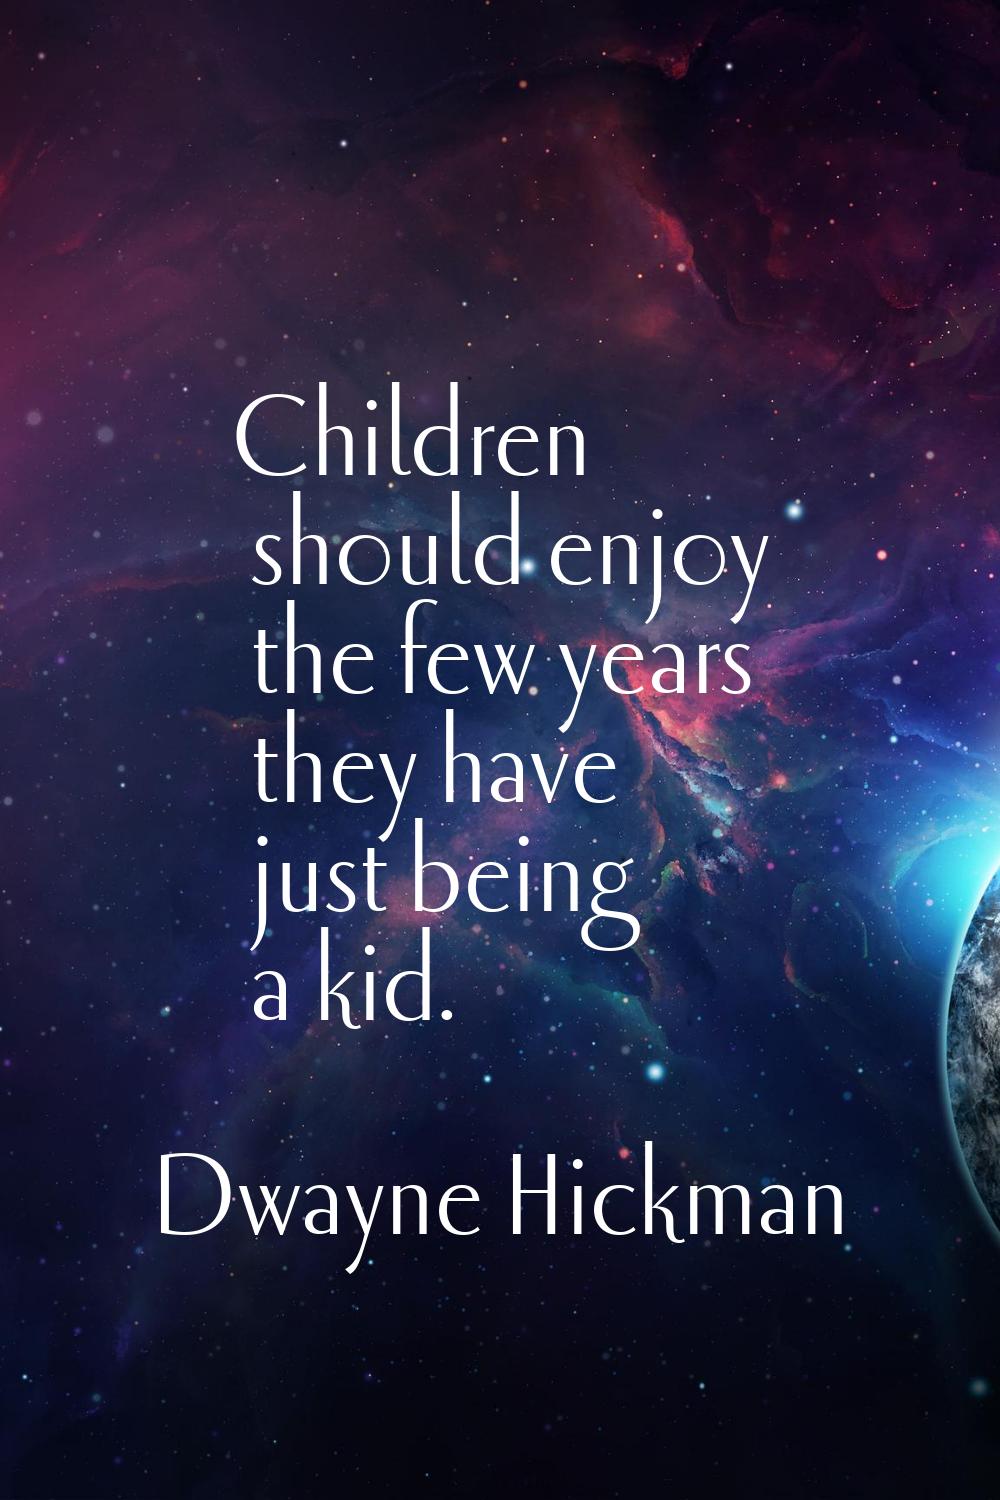 Children should enjoy the few years they have just being a kid.